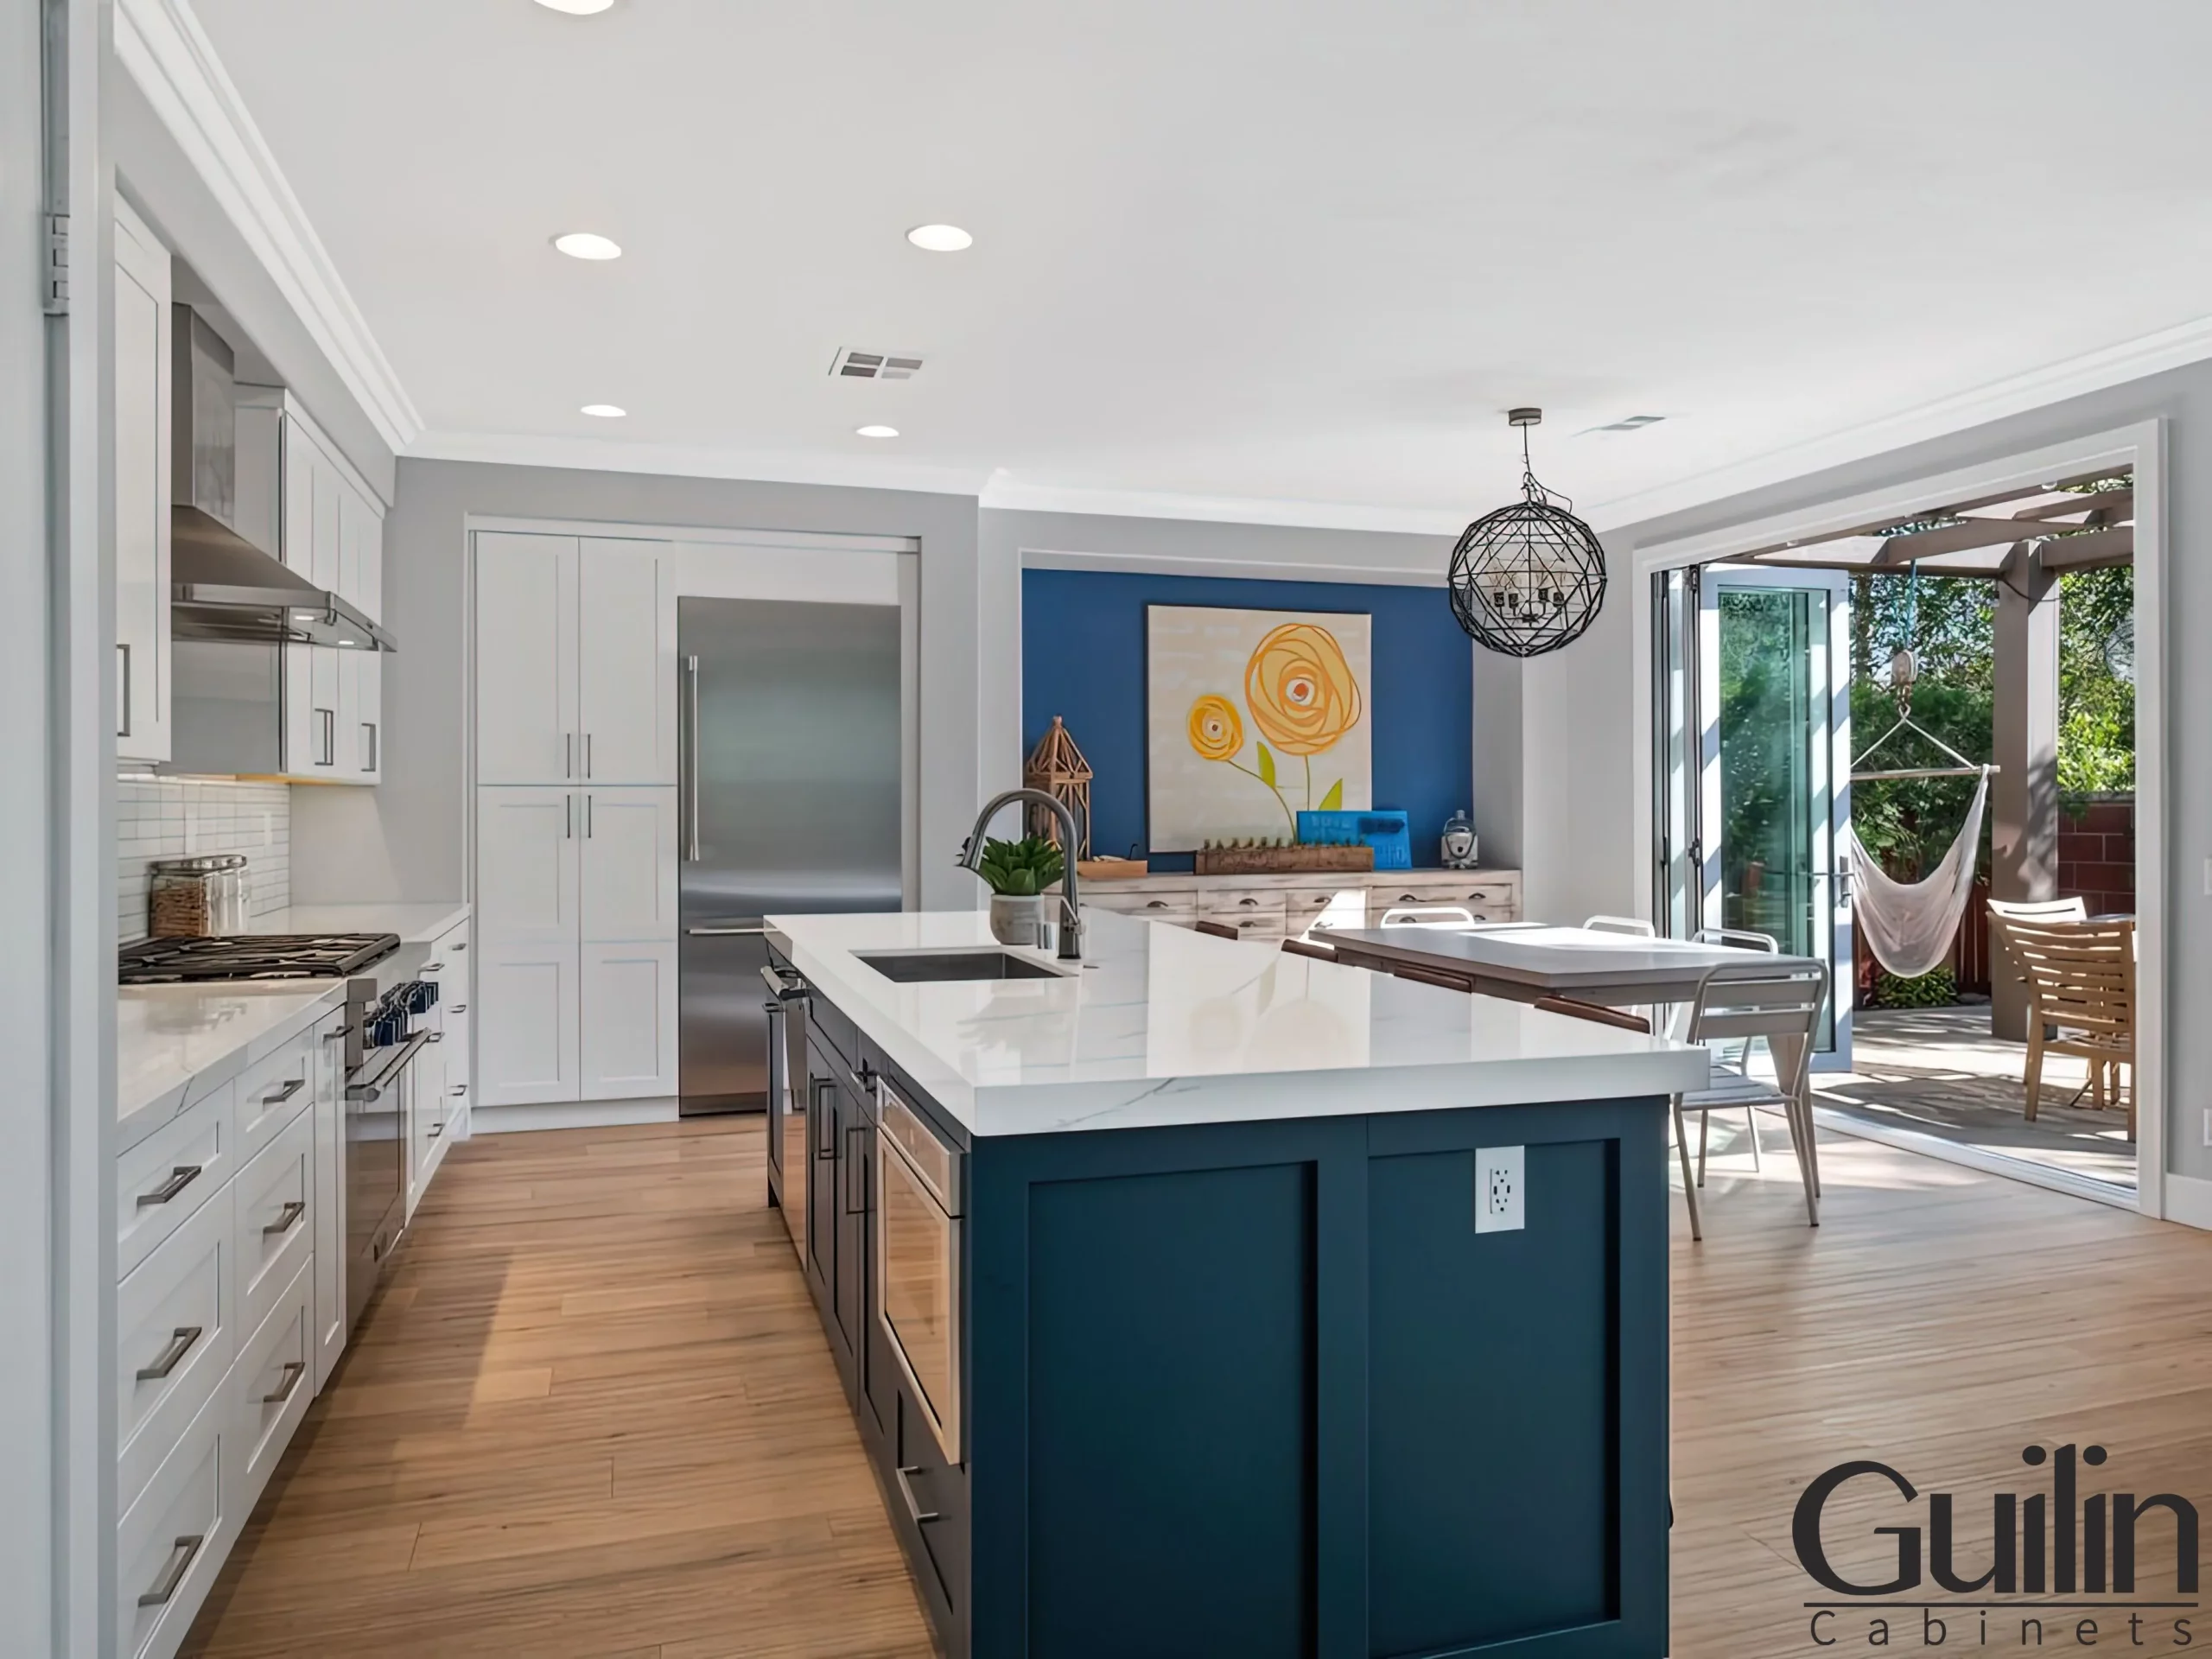 The Coastal Kitchen Style is a type of kitchen design that evokes a relaxed, seaside atmosphere, and focuses on natural materials and colors, airy and bright open-plan spaces, and a healthy lifestyle.